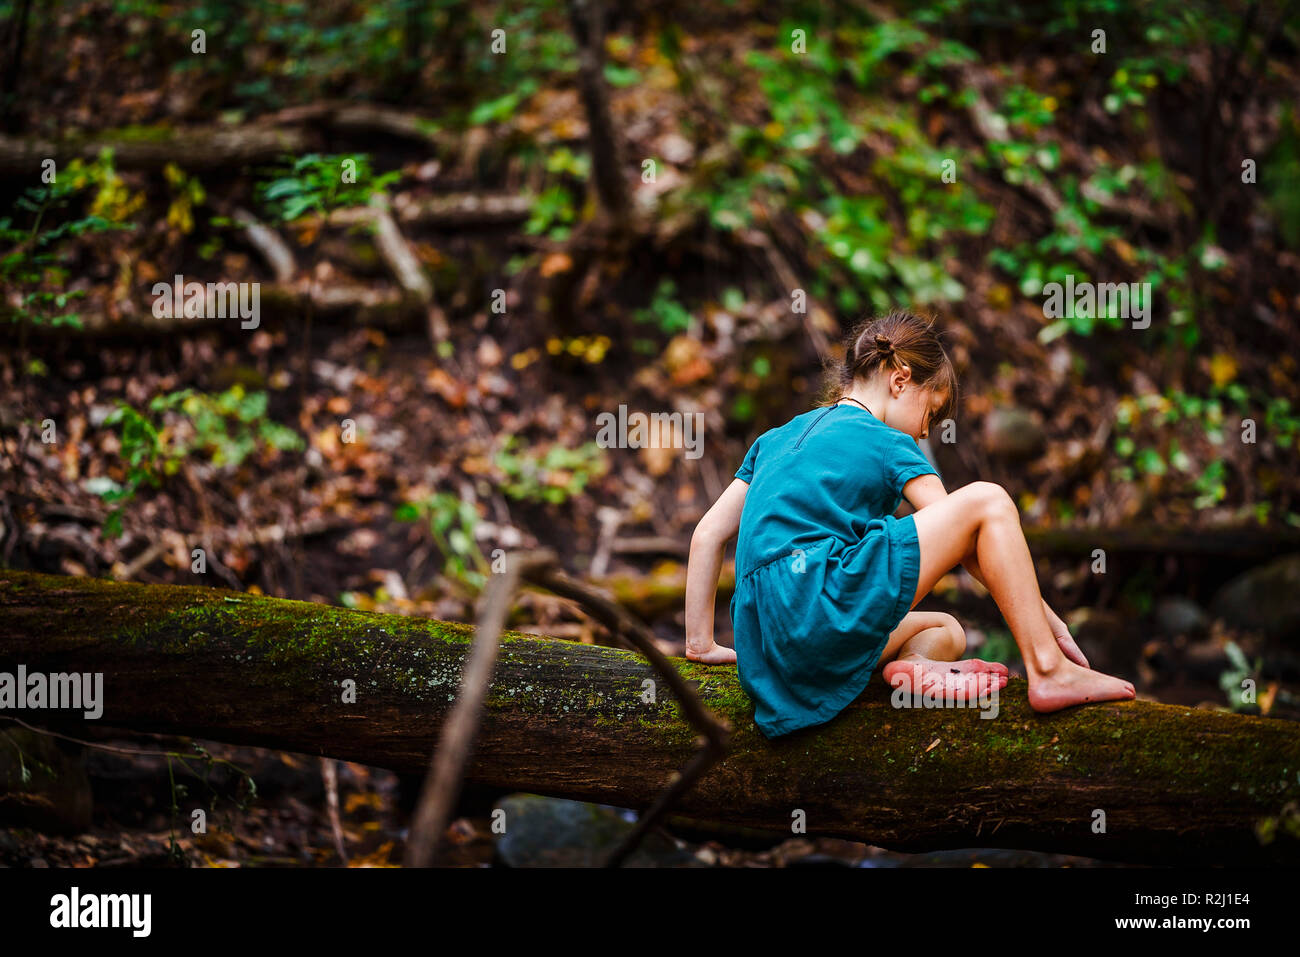 Girl climbing along a fallen tree in the forest, United States Stock Photo